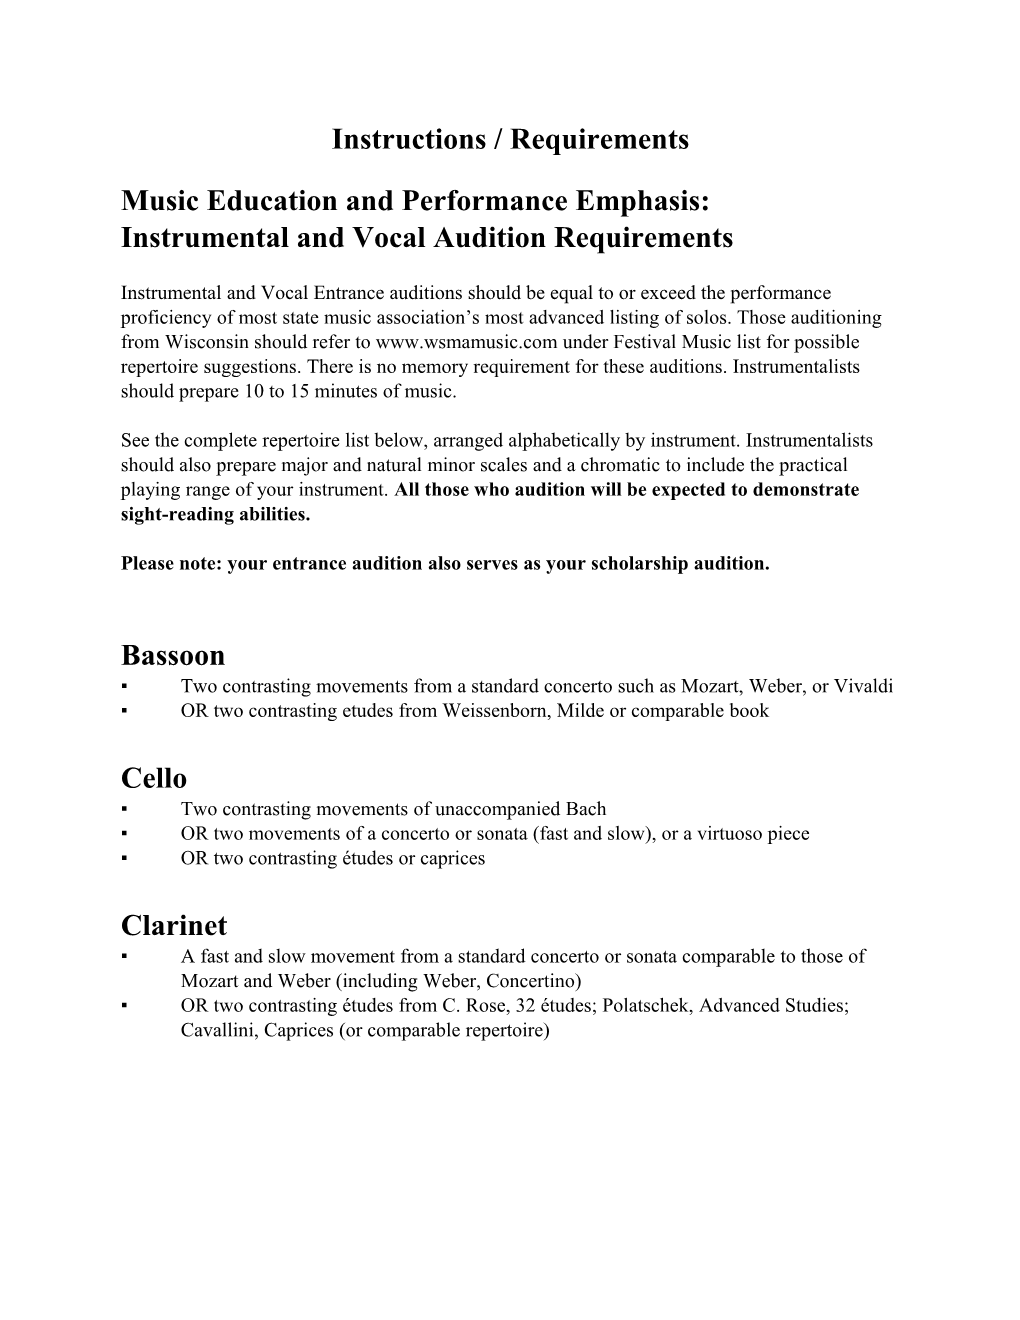 Music Education and Performance Emphasis